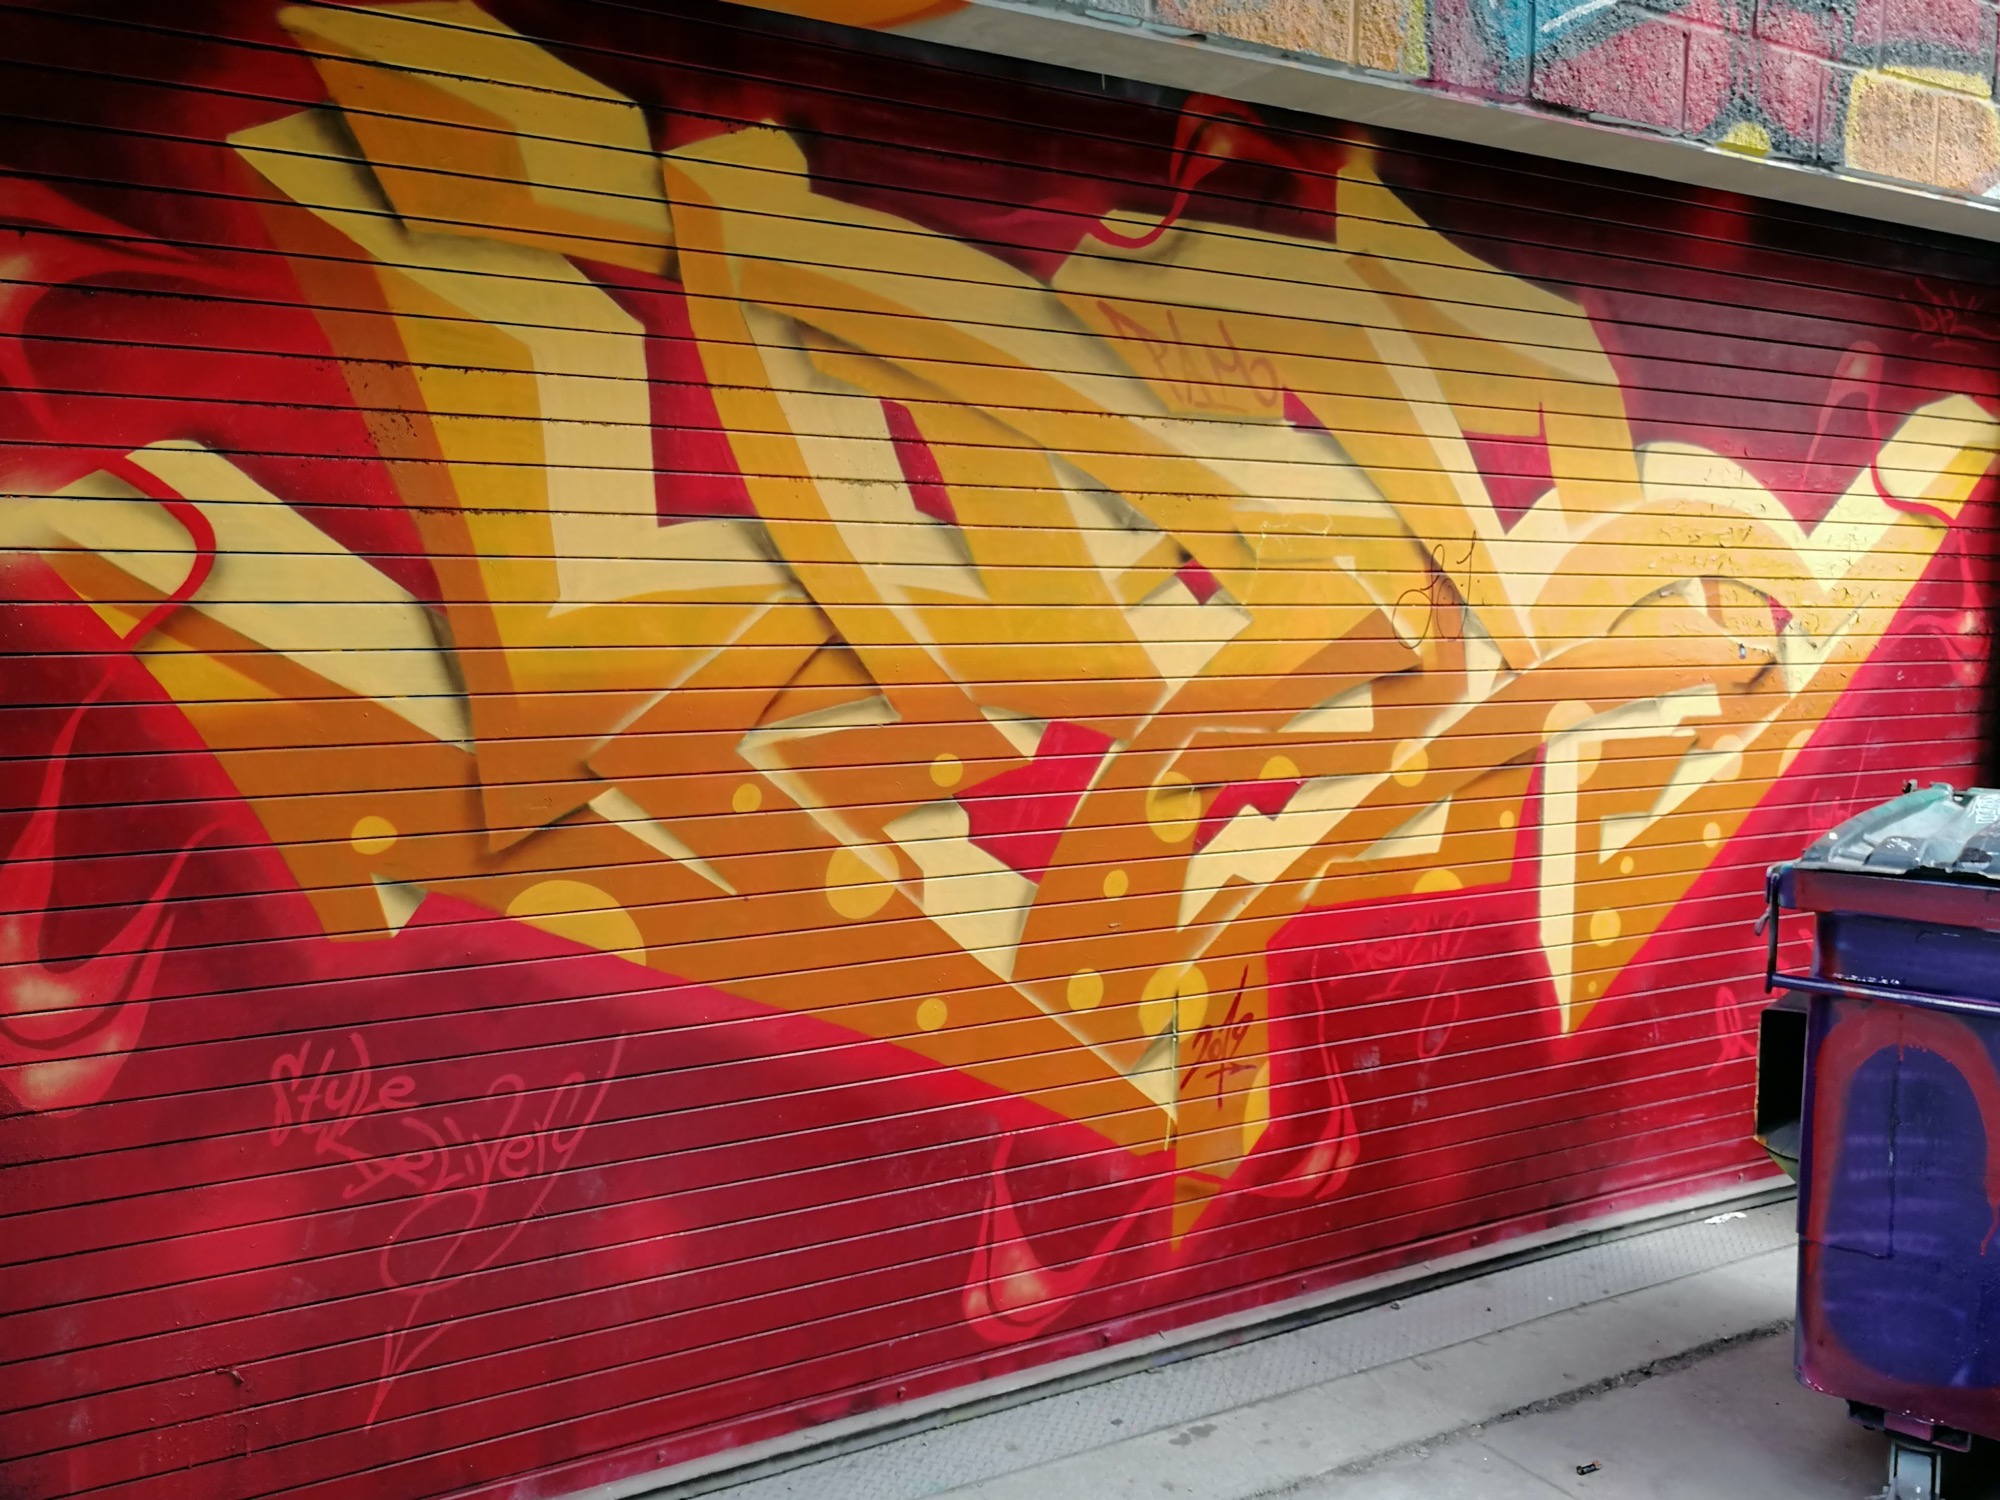 Graffiti 2575  captured by Rabot in Toronto Canada